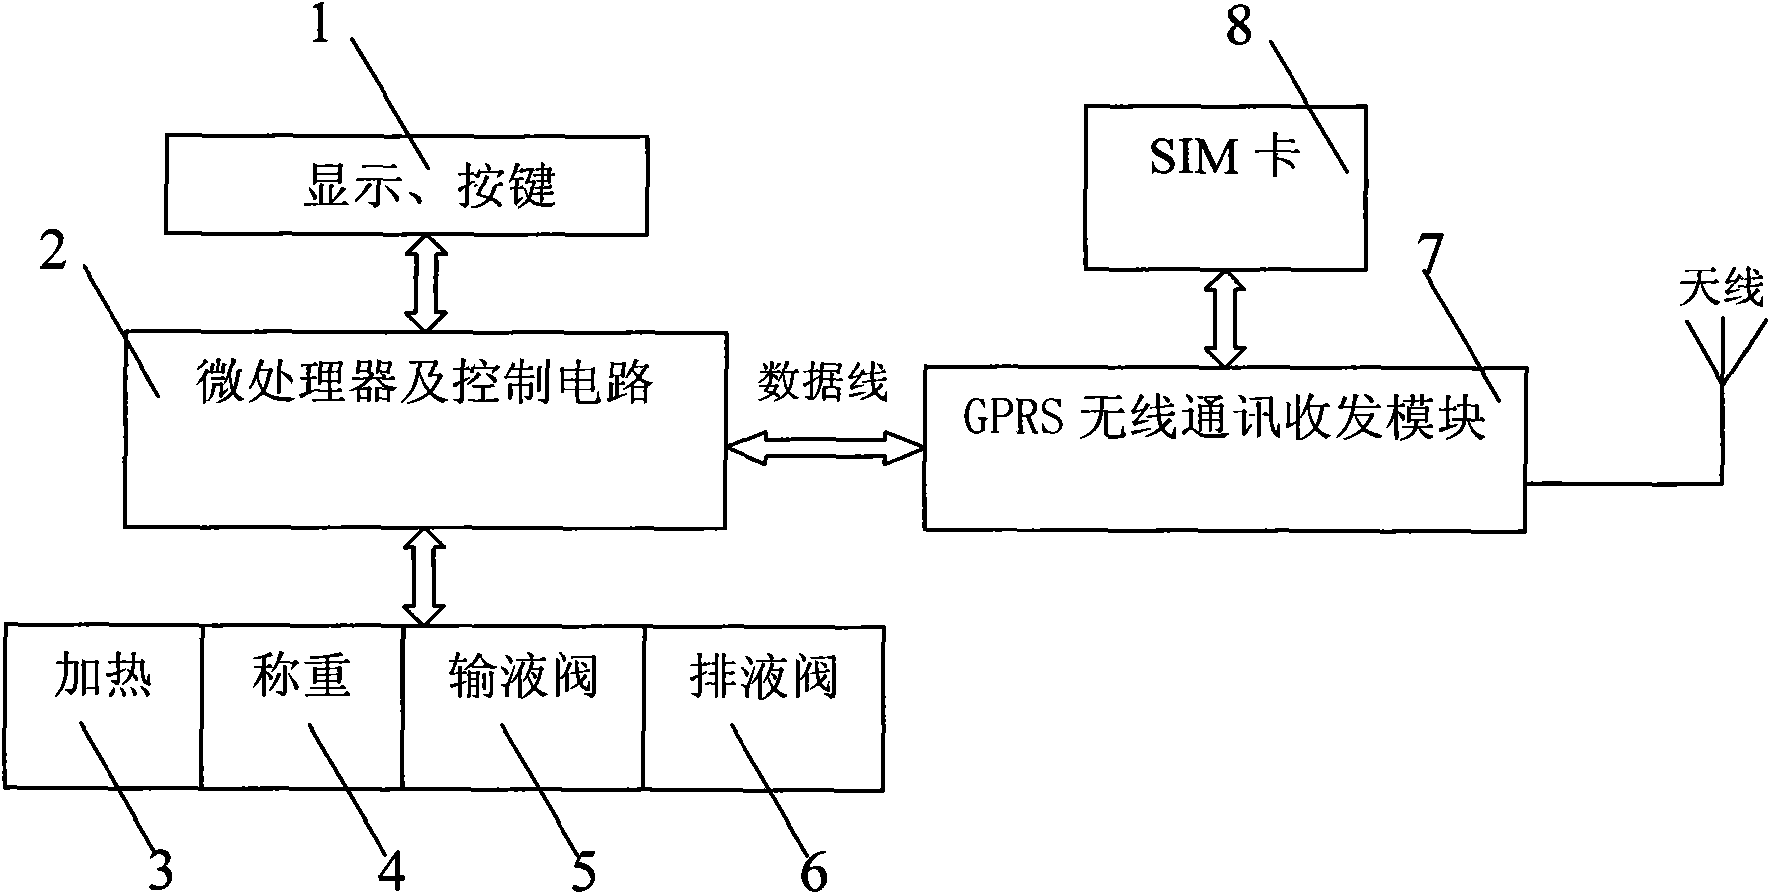 Automatic peritoneal dialysis wireless network system and data transmission method